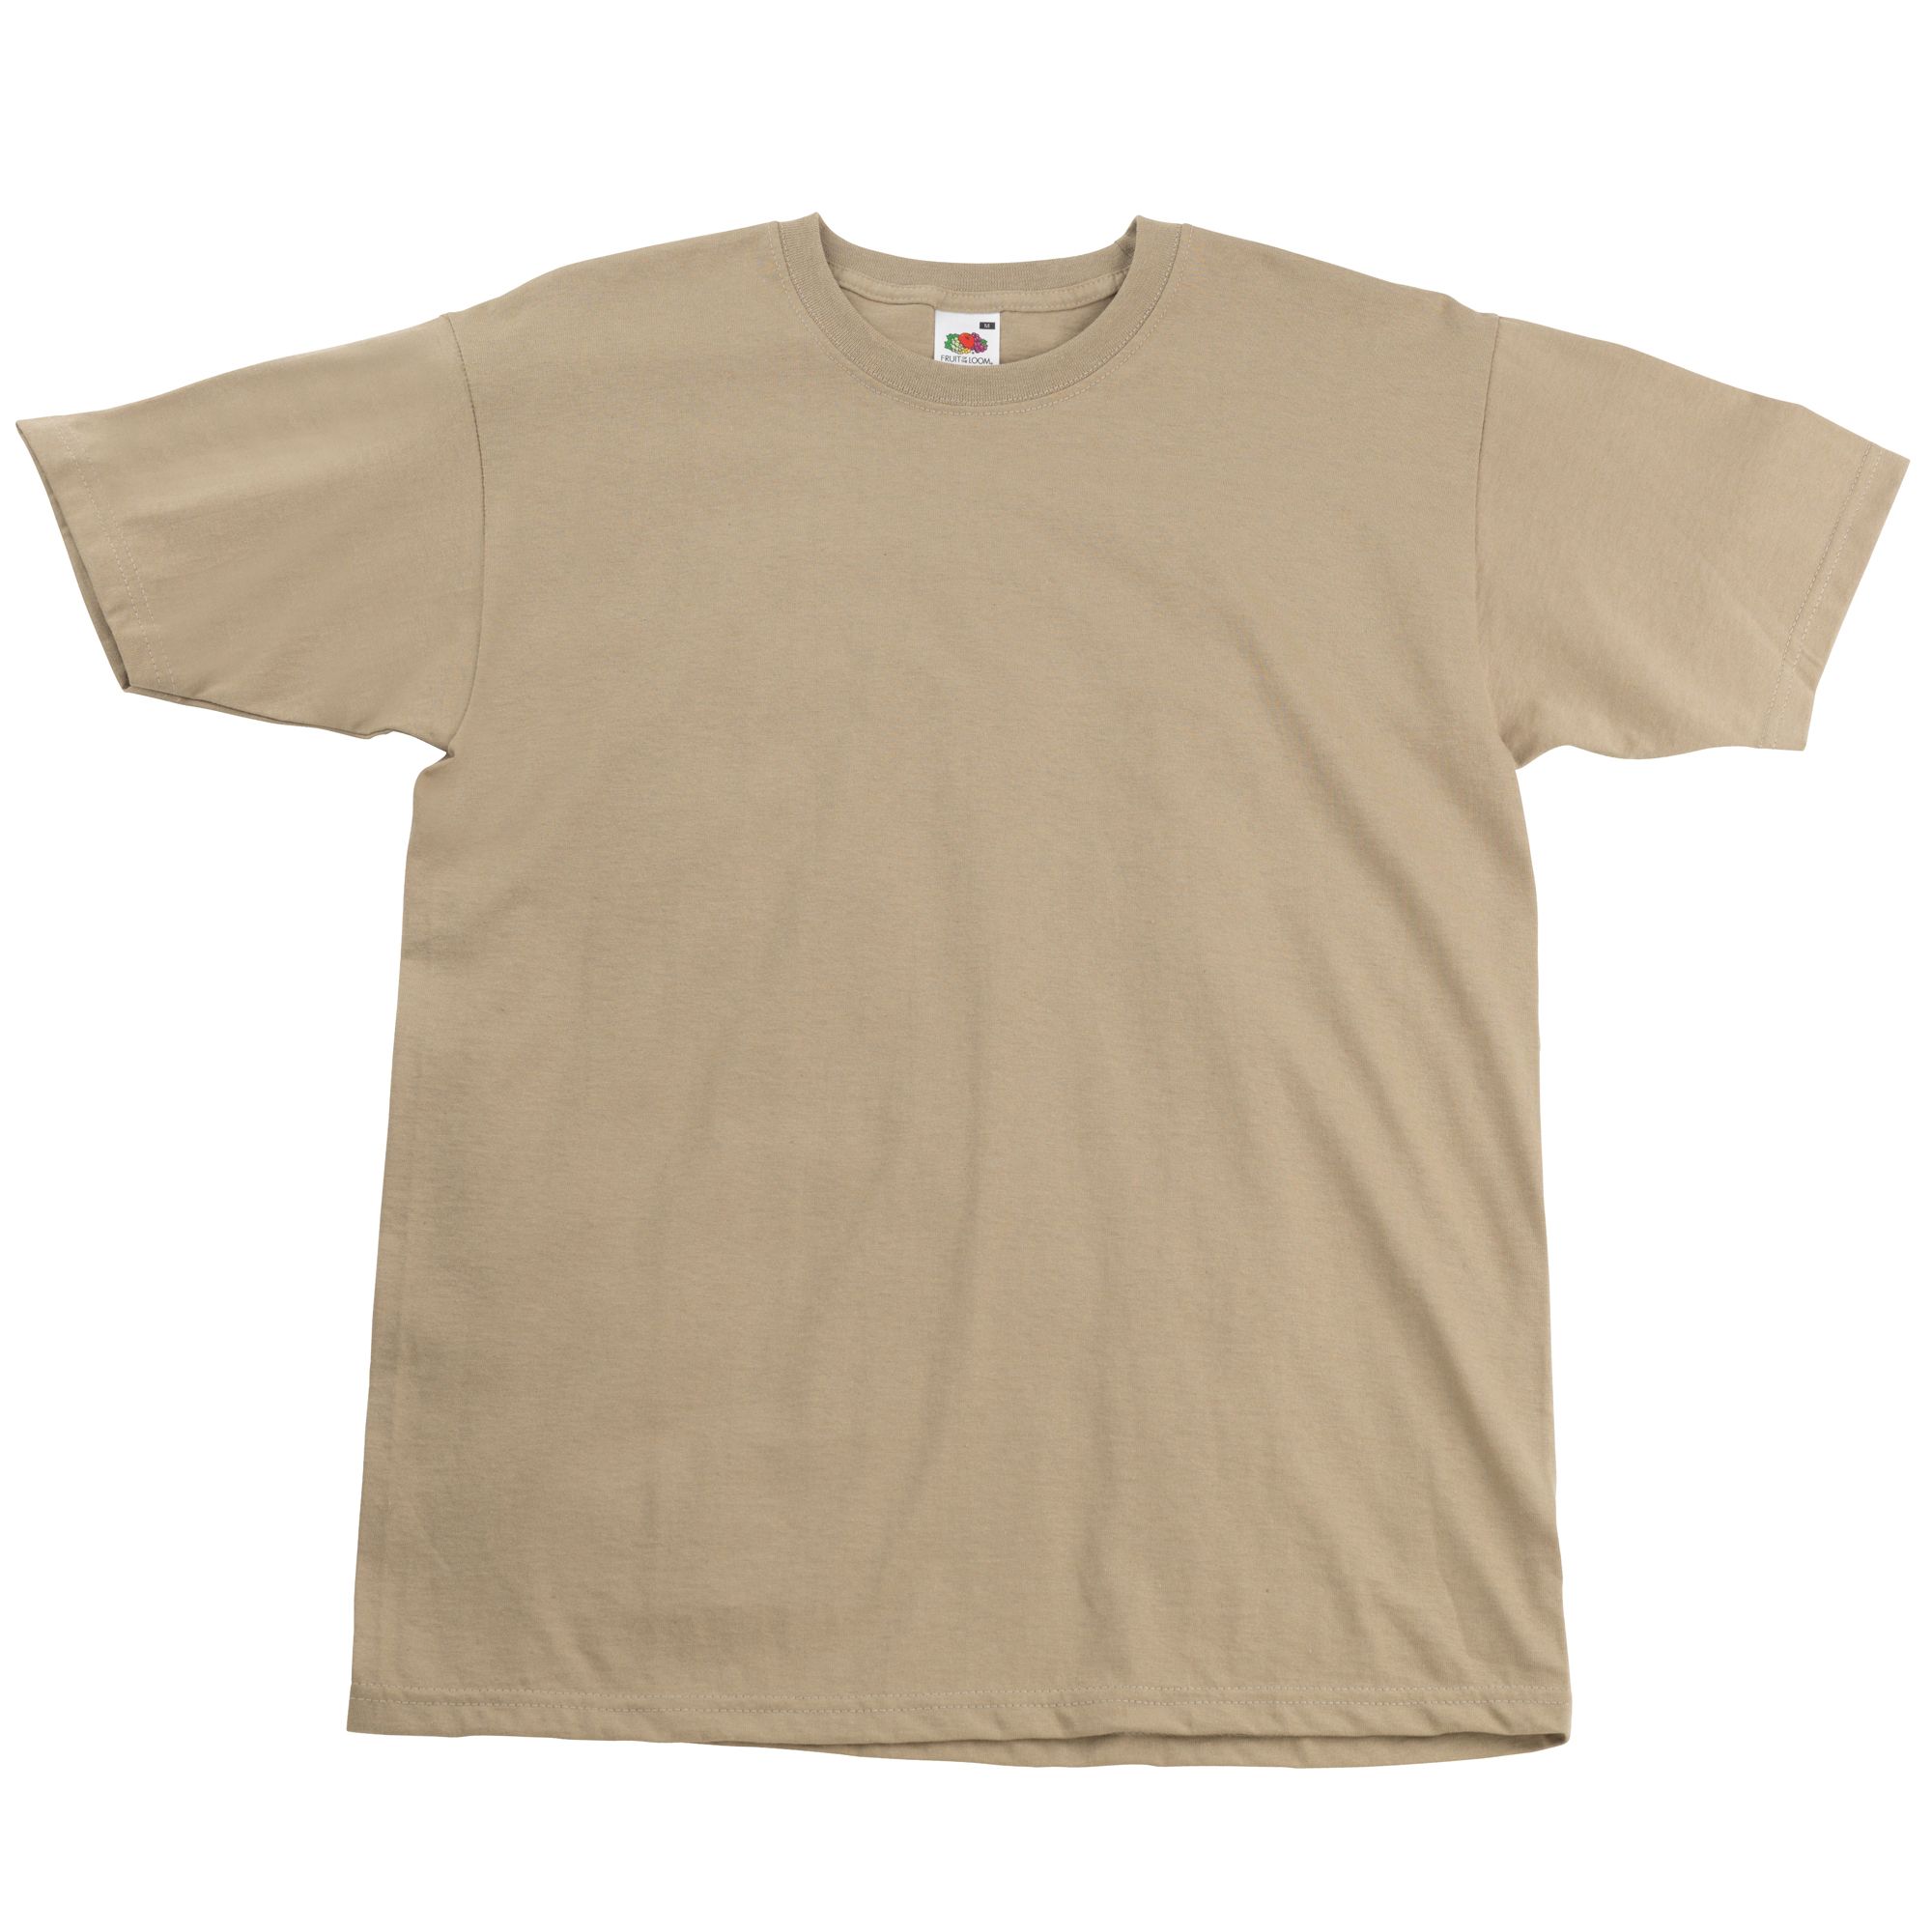 Short sleeve crew neck T-Shirt. Guaranteed to perform at 60 degree wash. Produced using Belcoro® yarn for a softer feel and cleaner printing process. Fine knit gauge for enhanced printability. One piece Cotton/Lycra® neck with shoulder to shoulder taping. *Ash 99% Cotton, 1% Polyester *Heather Grey 97% Cotton, 3% Polyester3XL available in White, Black, Navy and Heather Grey only. Weight: 190-205g/m². Fabric: 100% cotton*, Belcoro® yarn. S (35-37: To Fit (ins)). M (38-40: To Fit (ins)). L (41-43: To Fit (ins)). XL (44-46: To Fit (ins)). 2XL (47-49: To Fit (ins)). 3XL (50-52: To Fit (ins)). <BR><BR>FRUIT OF THE LOOM - a brand steeped in tradition, offering a comprehensive range of garments.